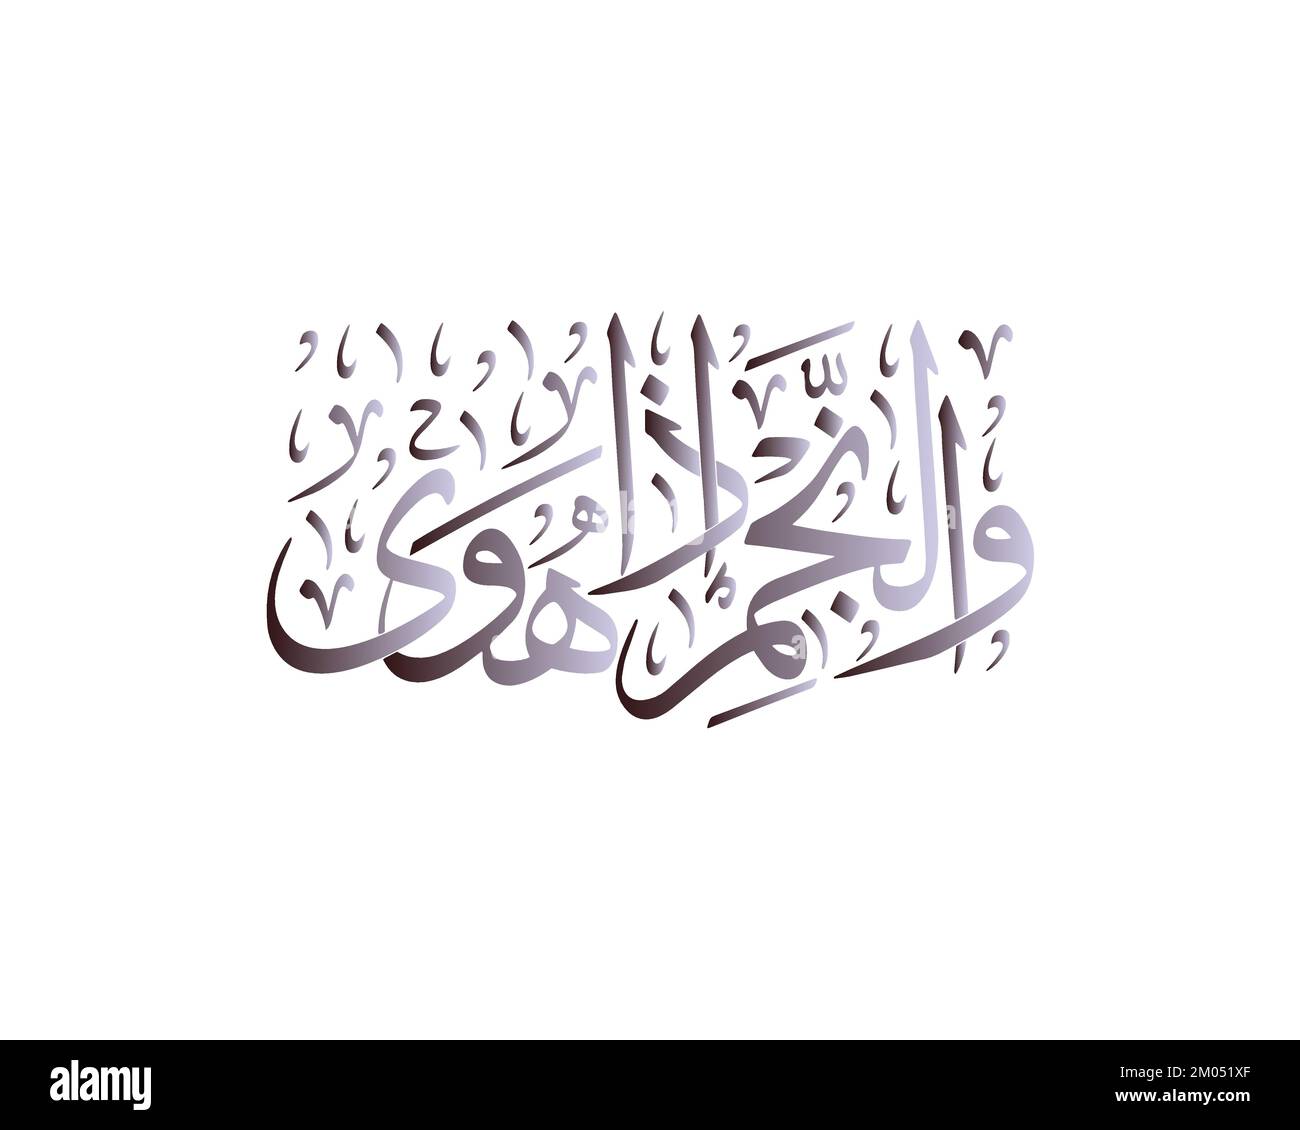 quranic islamic verse means : By the star when it descends , islamic calligraphy , arabic artwork vector Stock Vector